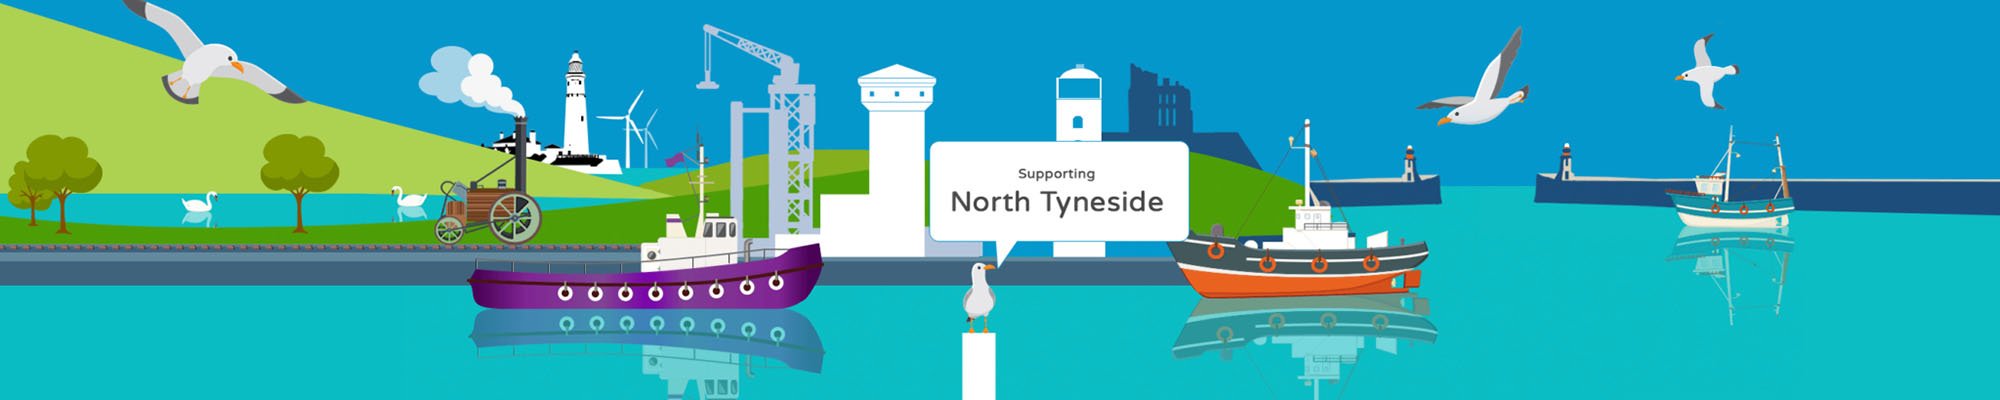 Living Well North TYneisde banner with blue and green graphics showing a river and boats